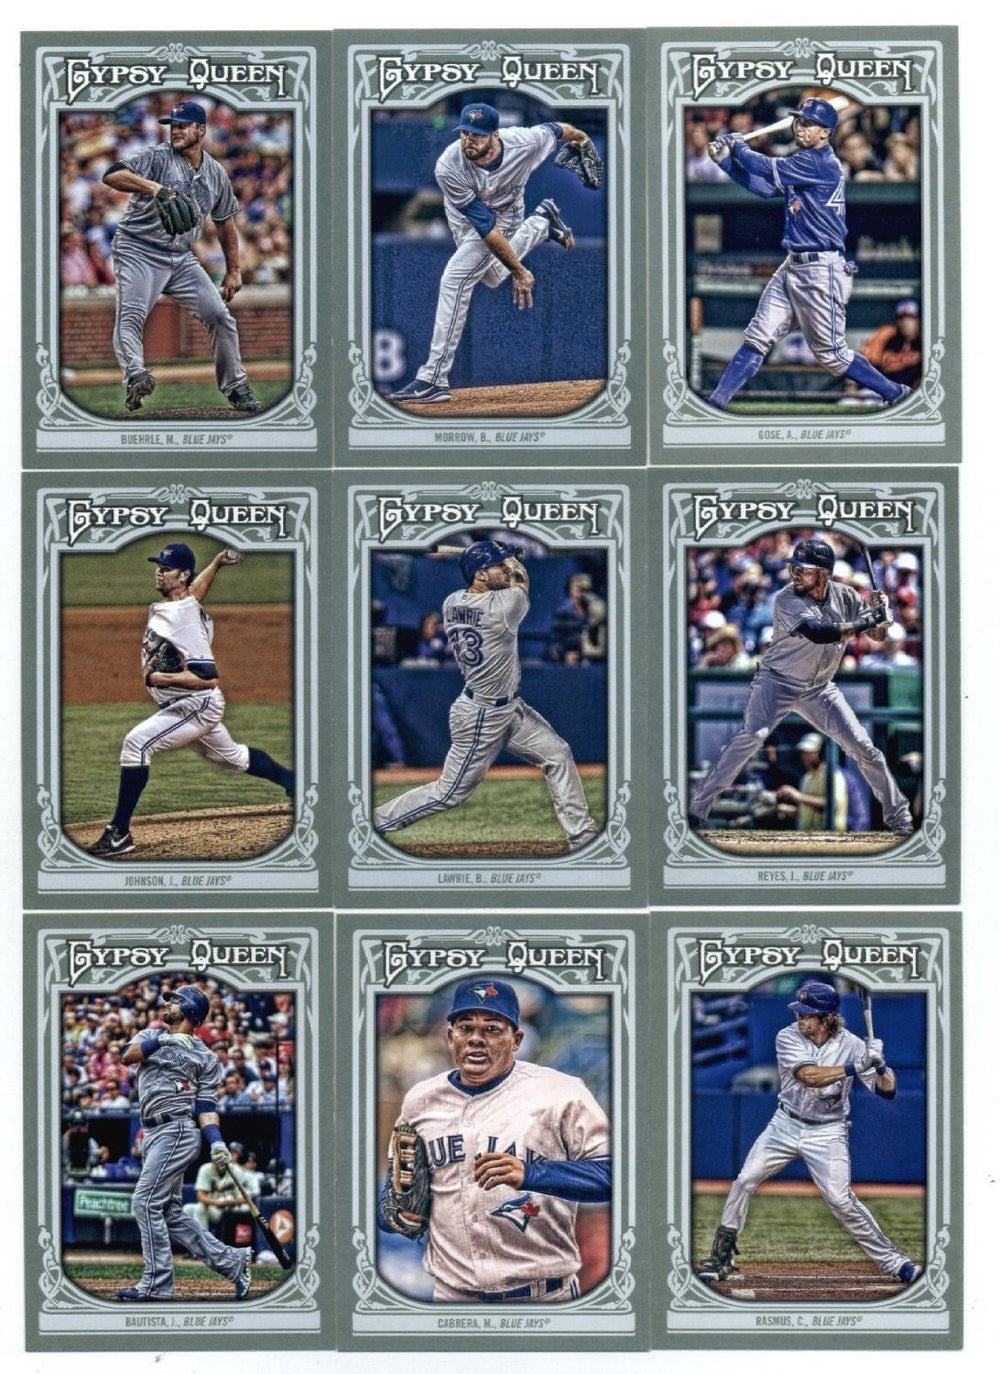 Toronto Blue Jays 2013 Topps GYPSY QUEEN Team Set with Jose Bautista and Jose Reyes Plus